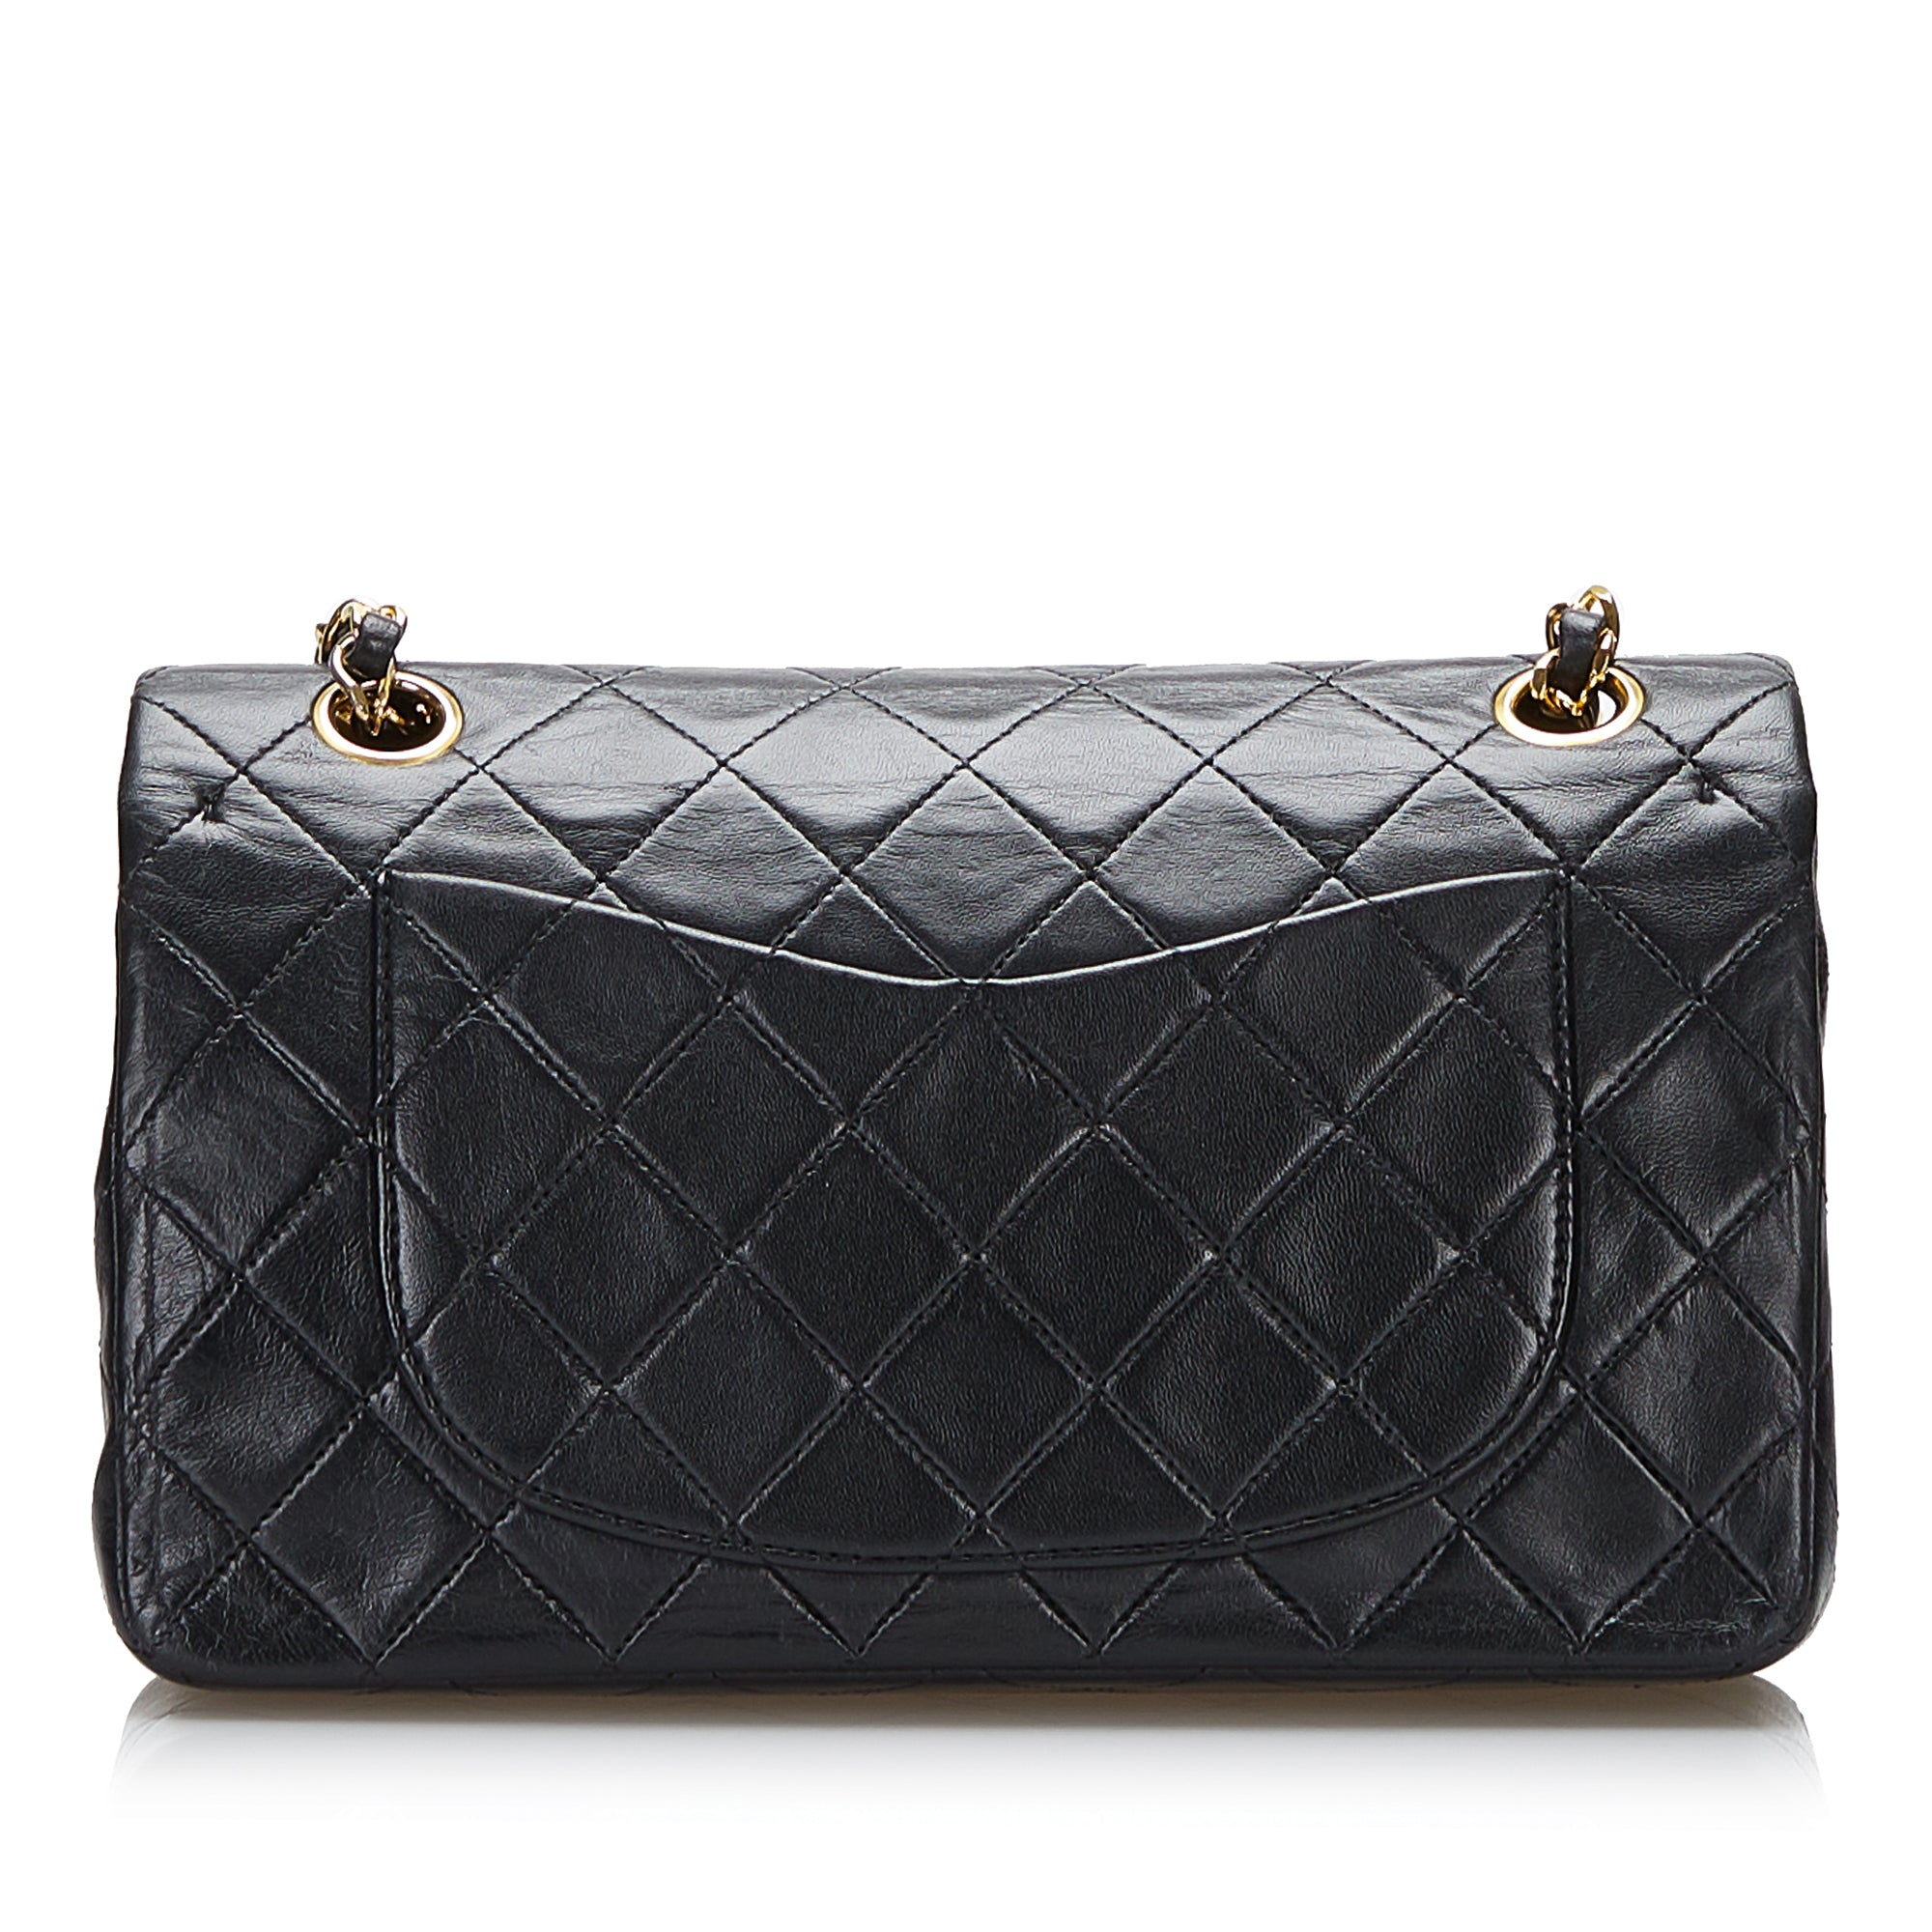 Black Chanel logo Classic Small Lambskin Double Flap Bag, RvceShops  Revival